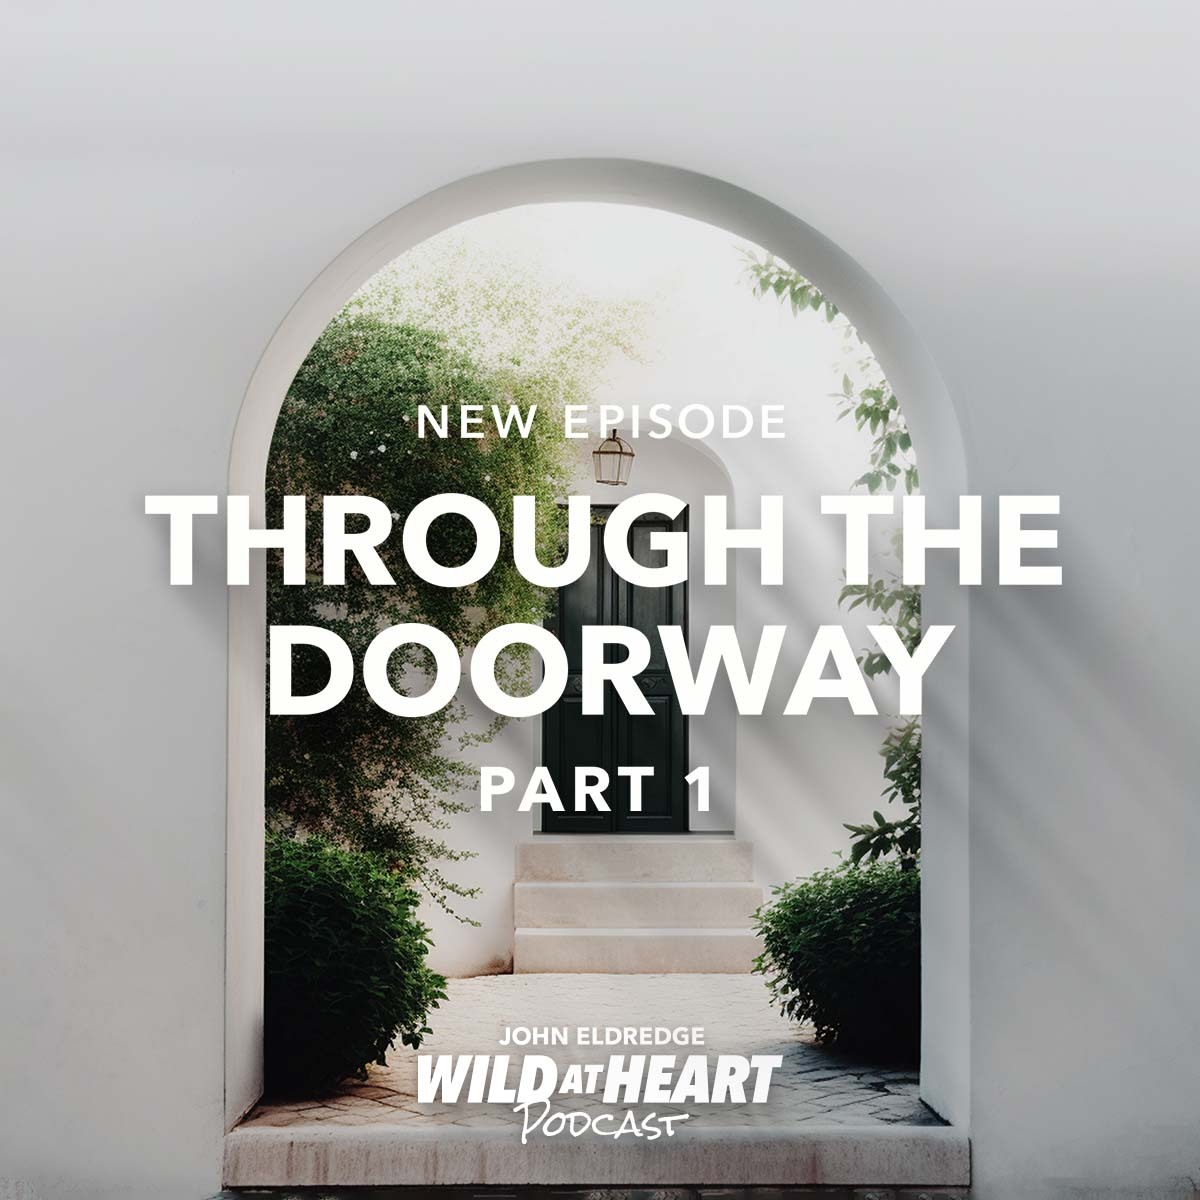 In this two-part series, John and Sam Eldredge talk about the importance—and challenges—of being fully present to others in their suffering. bit.ly/wahdoorway1